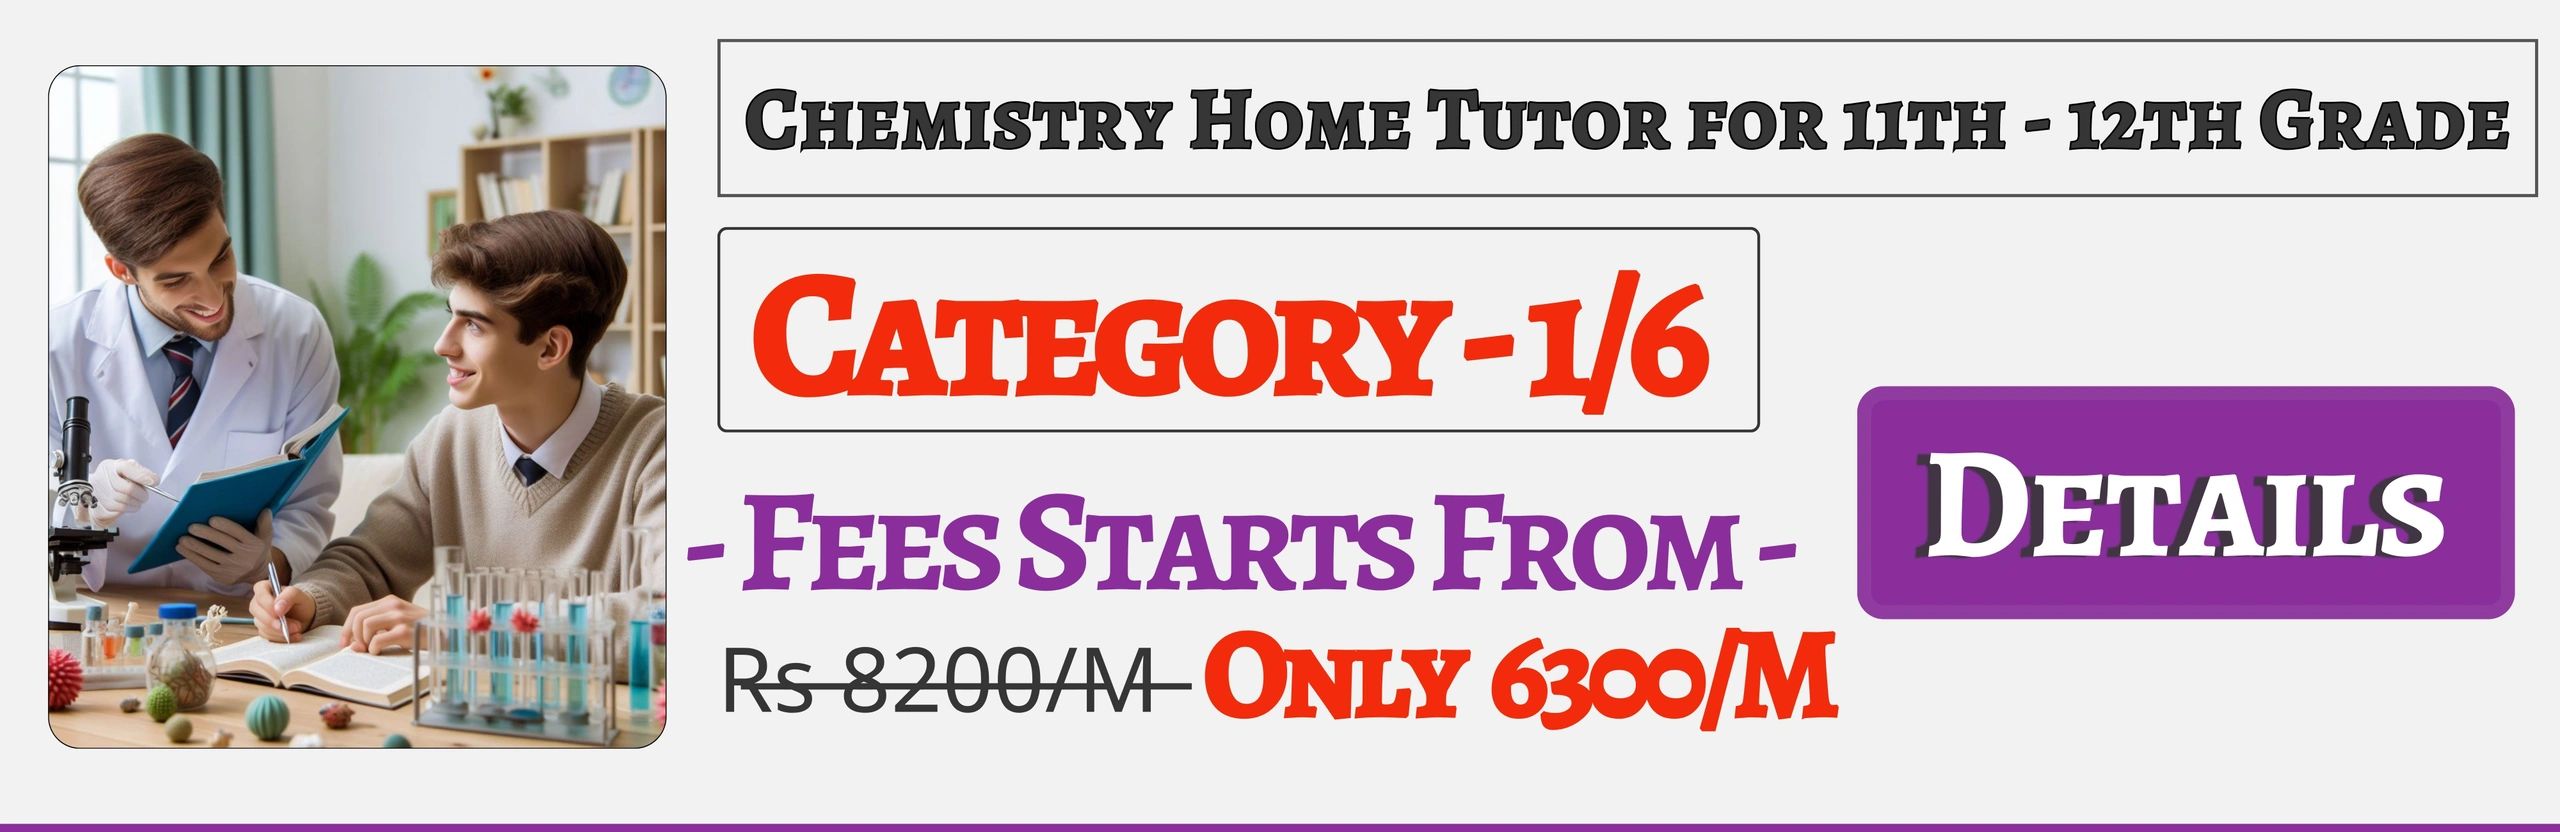 Book Best Nearby Chemistry Home Tuition Tutors For 11th & 12th In Jaipur , Fees Only 6300/M